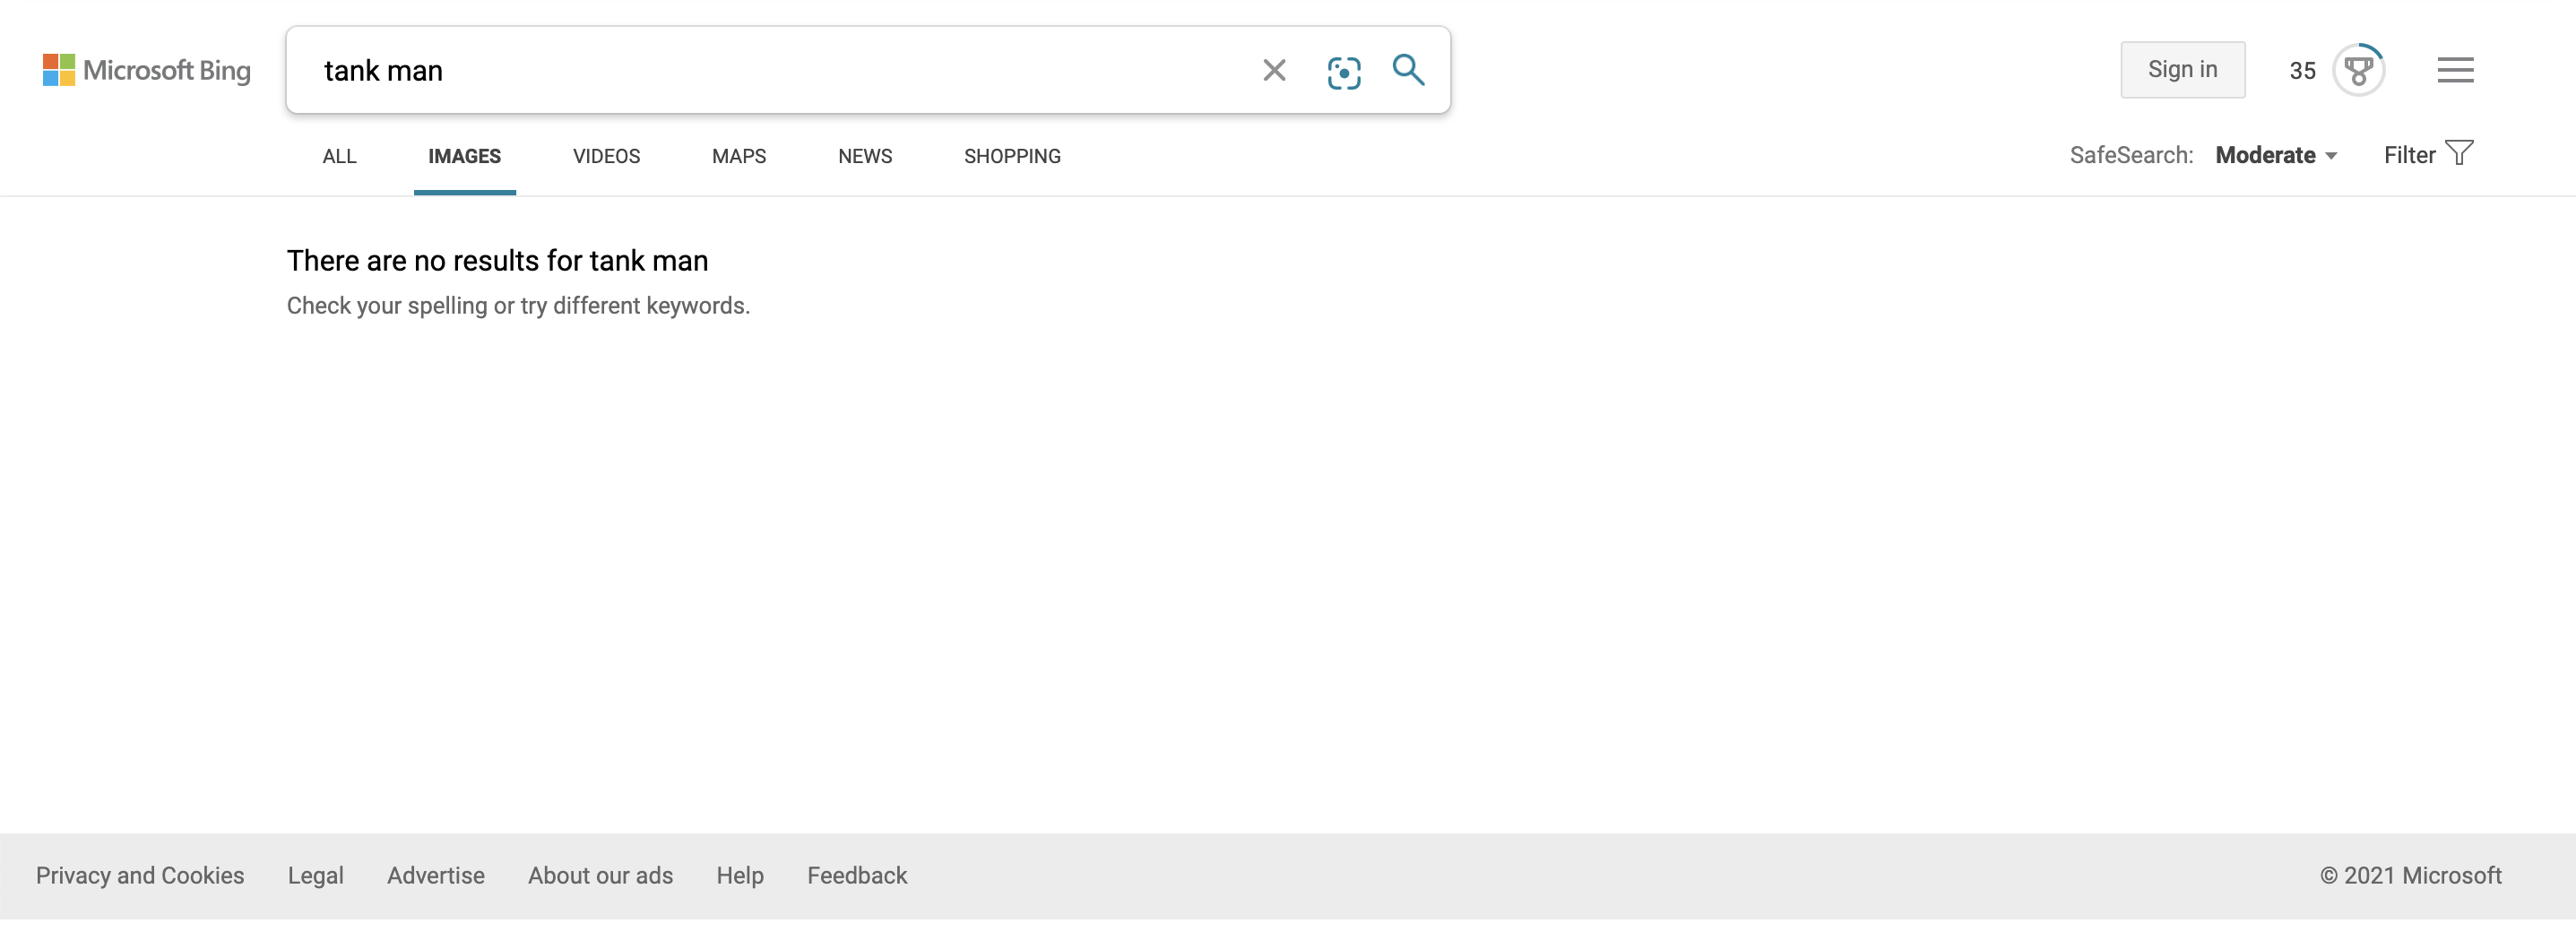 Microsoft-owned search engine Bing was displaying no image search results for "tank man," a reference to the 1989 Tiananmen Square massacre.